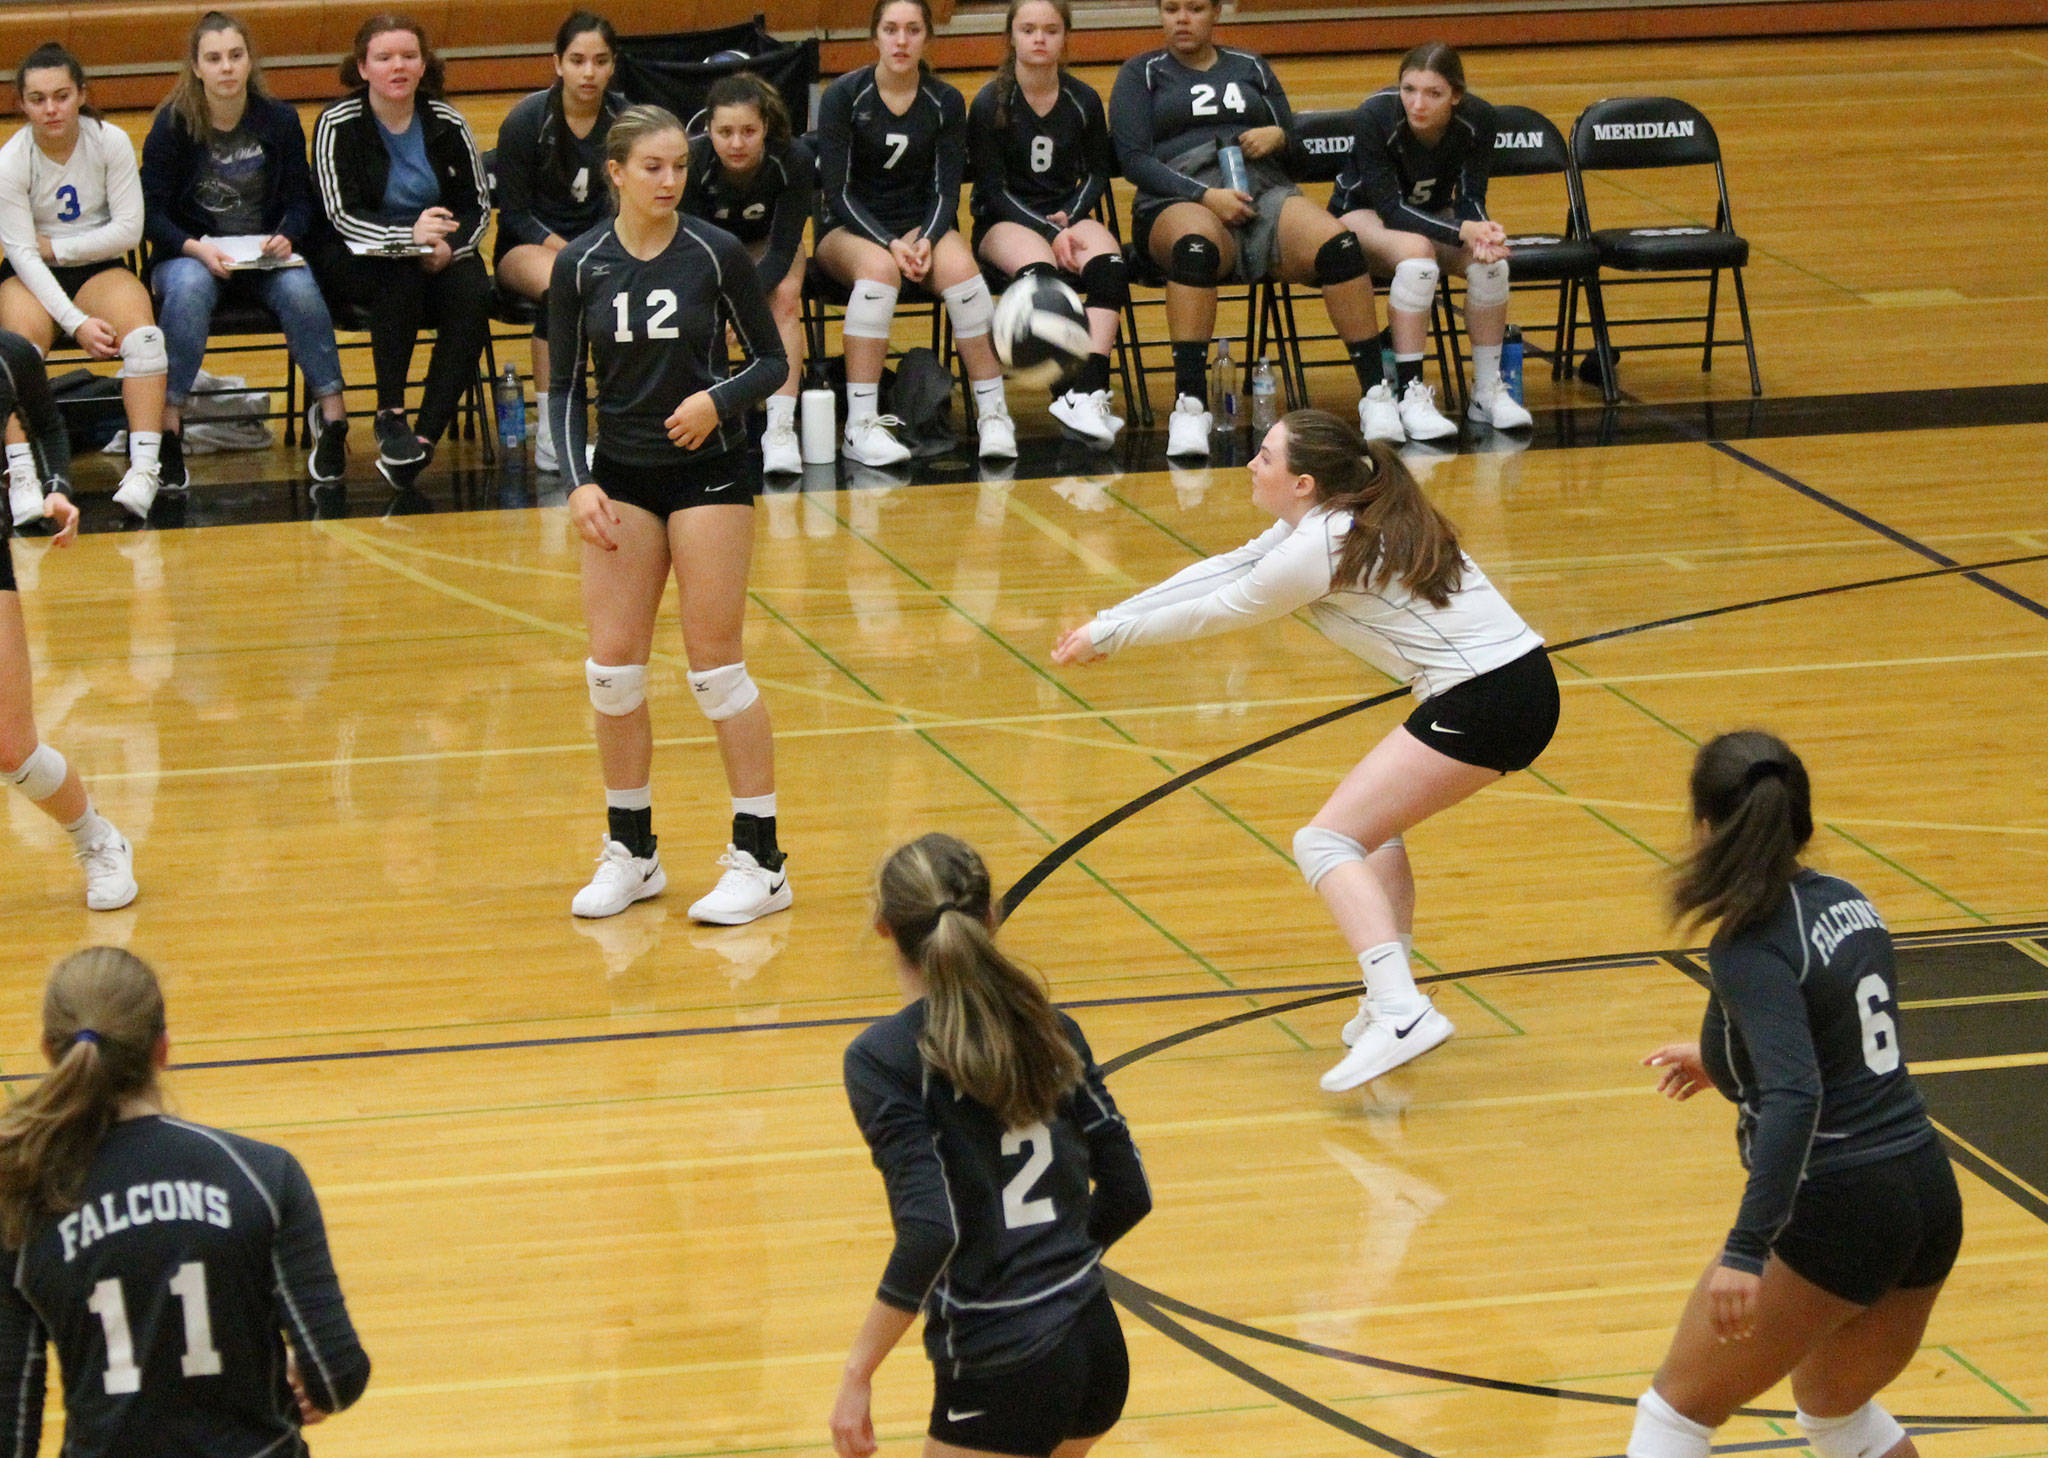 Kayla Knauer (white jersey) sets up to pass the ball as Emma Hodson (11), Emma Leggett (12), Alyssa Ludtke (2) and Maya Tschetter look on.(Photo by Jim Waller/South Whidbey Record)